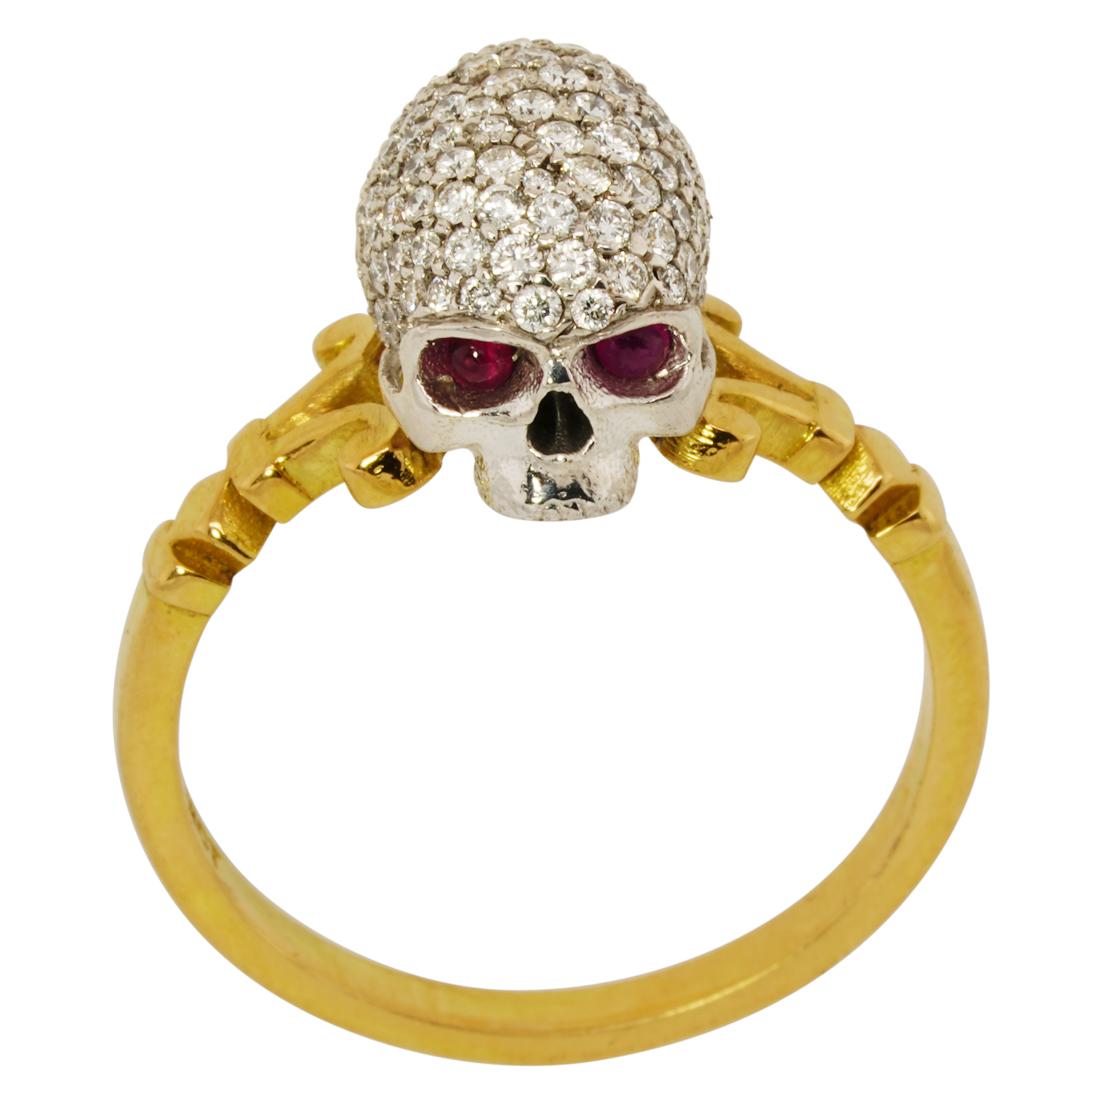 Catacomb Saint Diamond Encrusted Skull Ring in 18kt Gold with Diamonds & Rubies For Sale 7